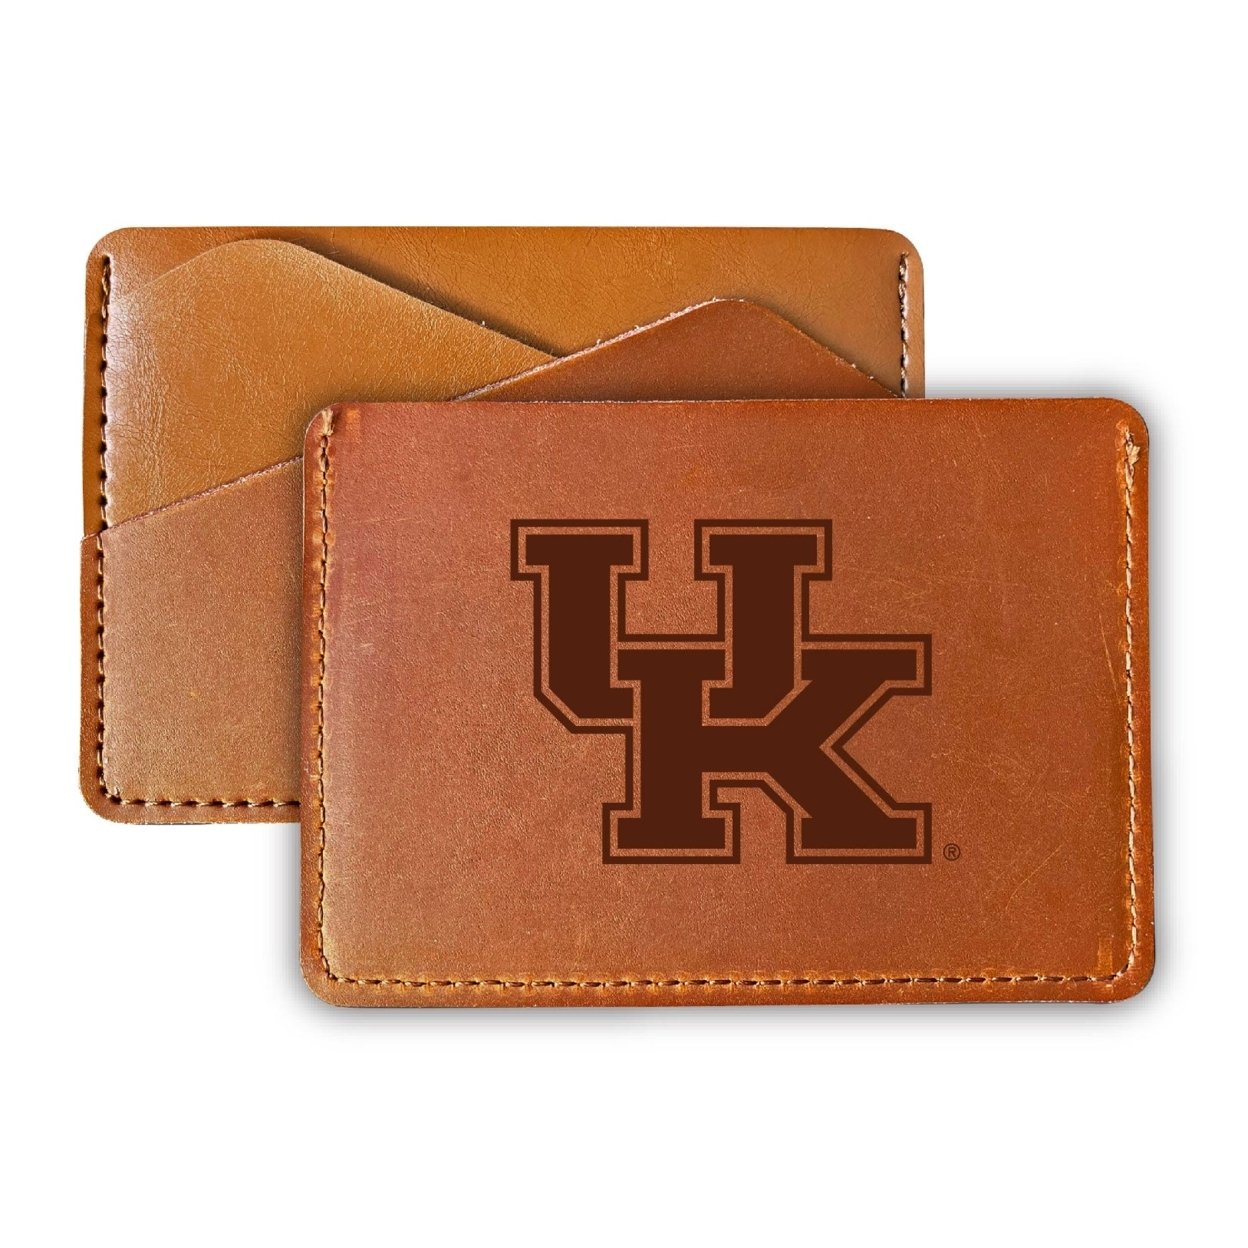 R and R Imports Elegant Kentucky Wildcats Leather Card Holder Wallet - Slim Profile, Engraved Design